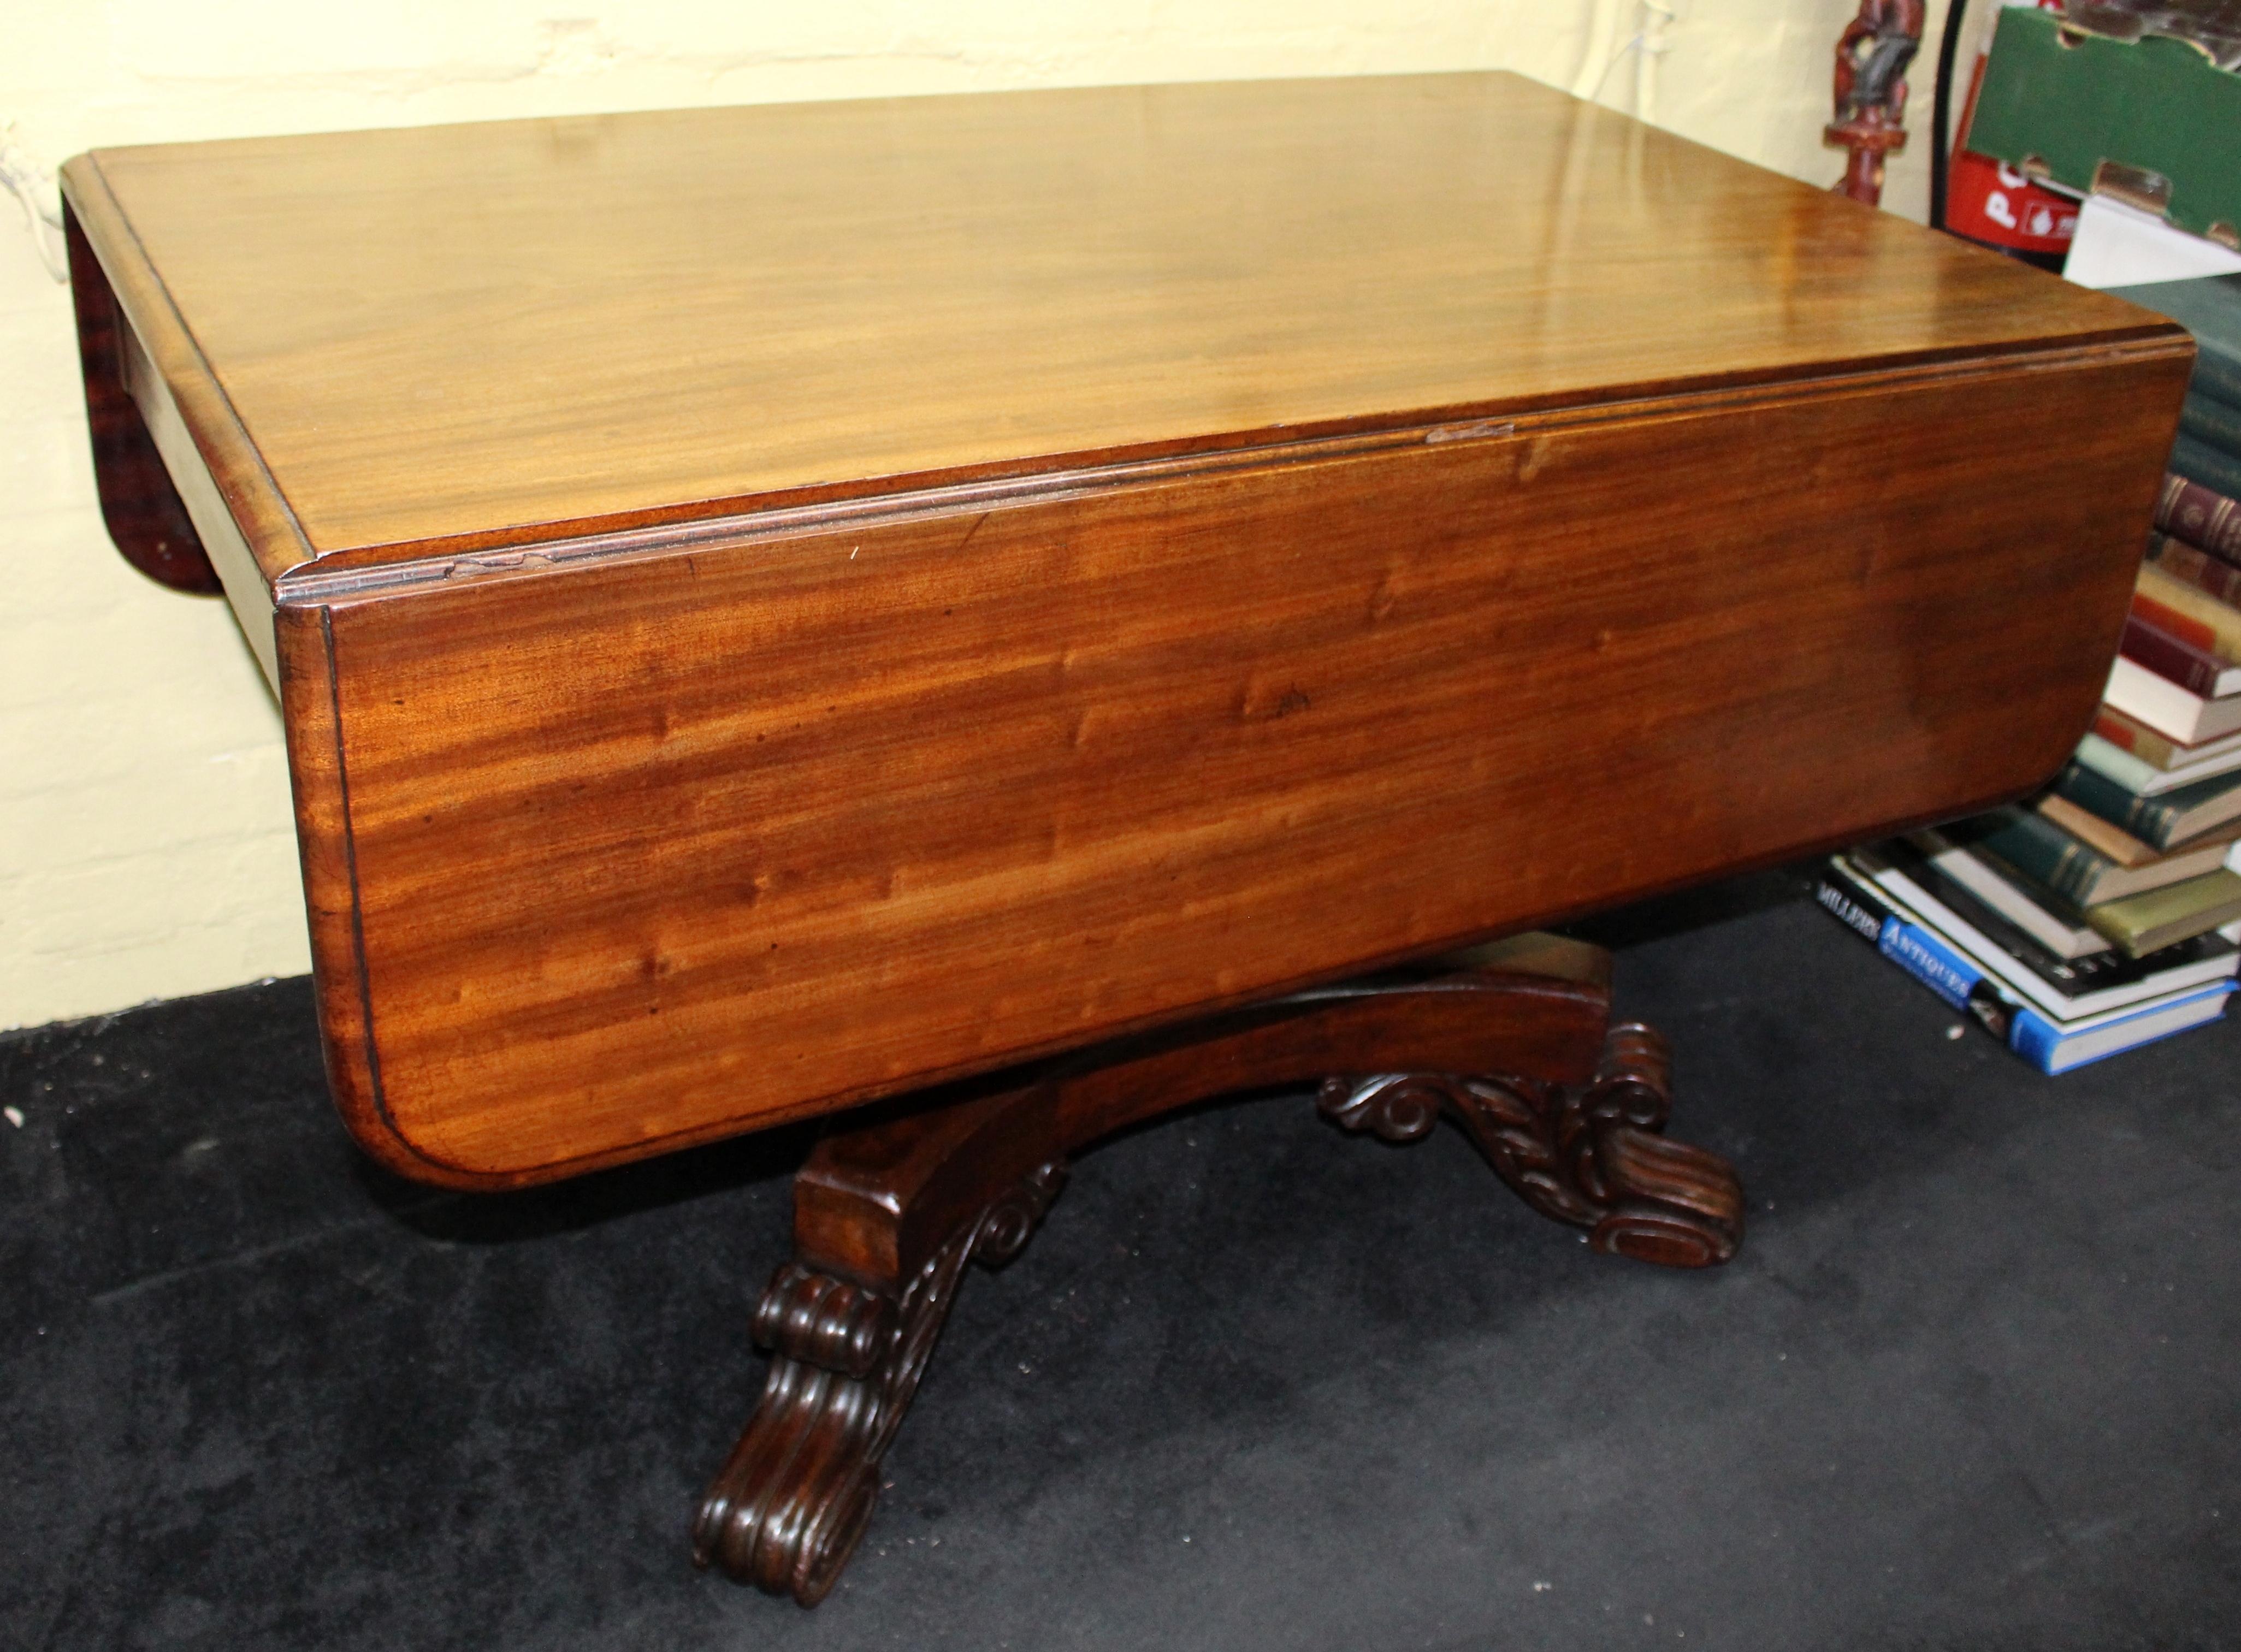 William IV mahogany drop leaf centre table


Measures: Length 120.5 cm 47 1/2 in

Width (leaves down) 74 cm 29 1/4 in

Width (leaves up) 134 cm 52 3/4 in

Height 72 cm 28 1/2 in
 

Period William IV

Wood Mahogany

Condition Very